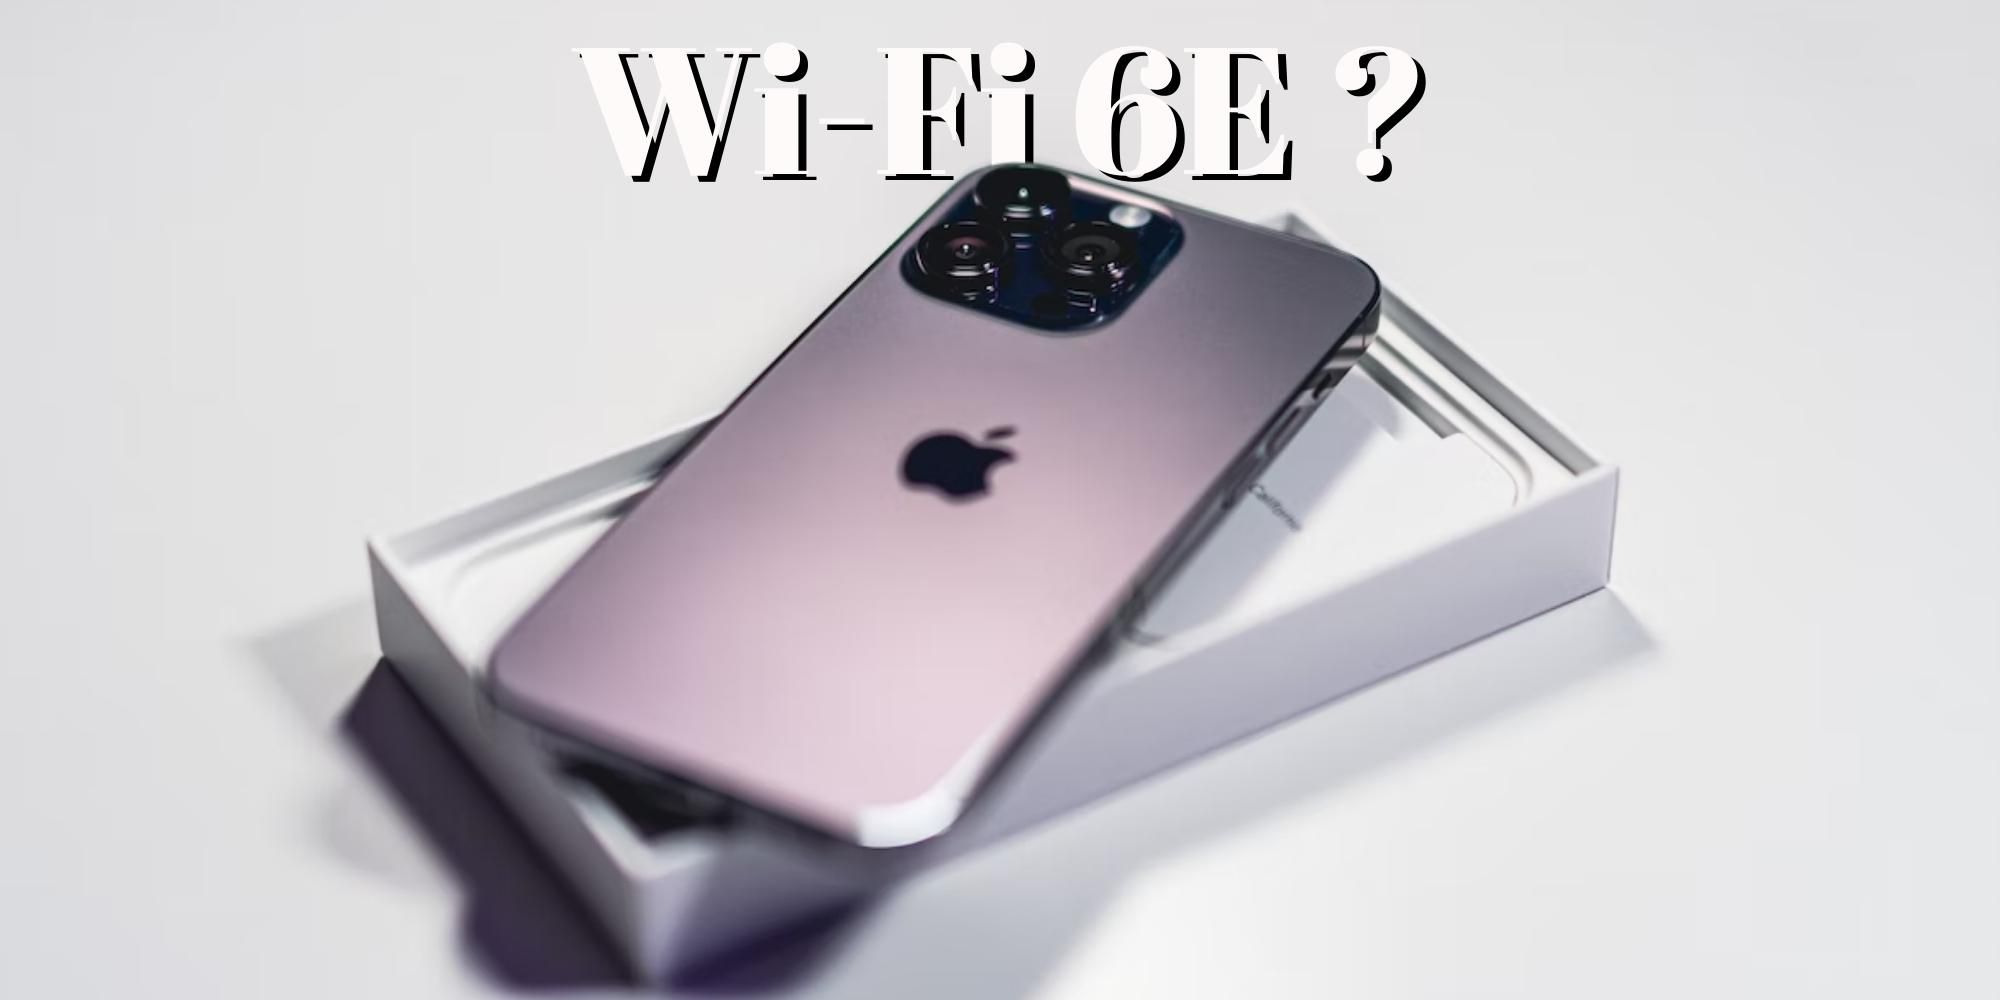 image of an iPhone 14 Pro with its box, with the words Wi-Fi 6E written towards the top, on a plain gray background